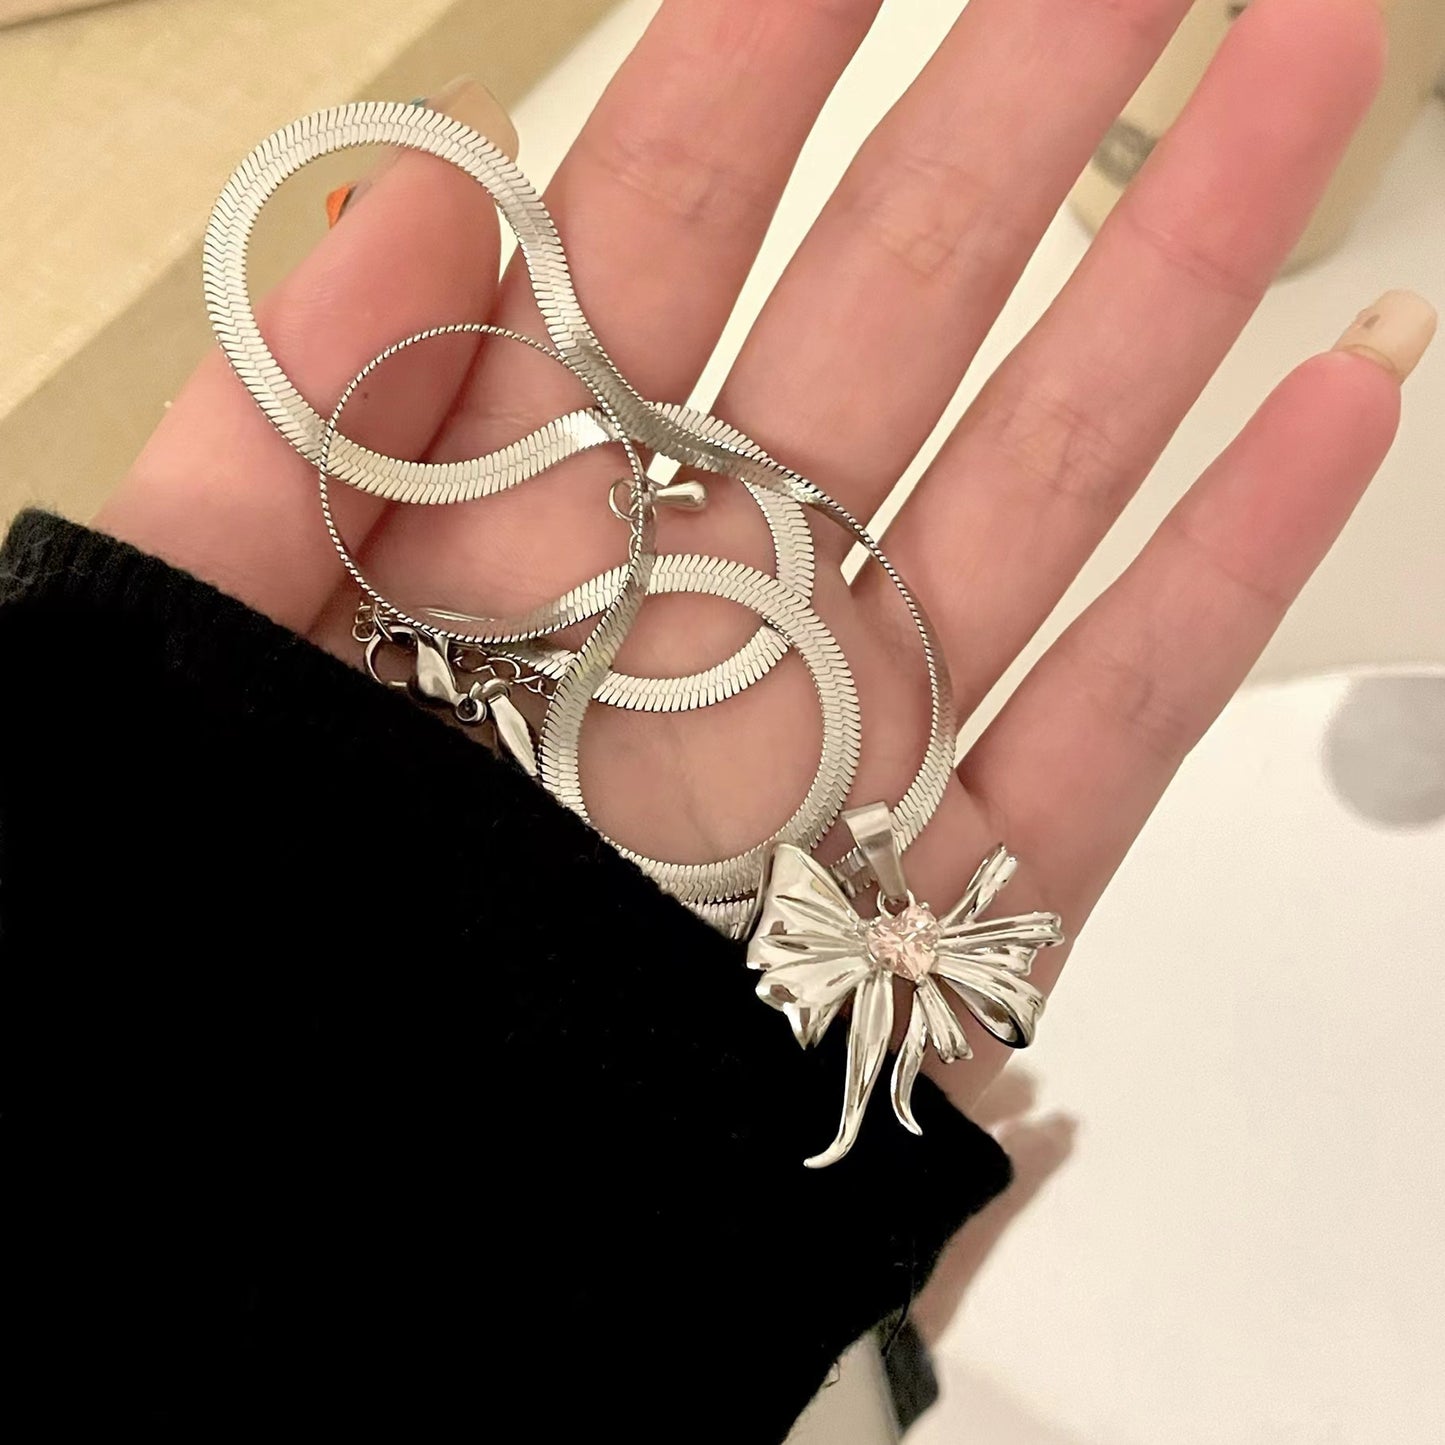 Bow Necklace Earrings 2021 New Feminine Style Simple Versatile Texture Design Luxury Clavicle Chain Fashion